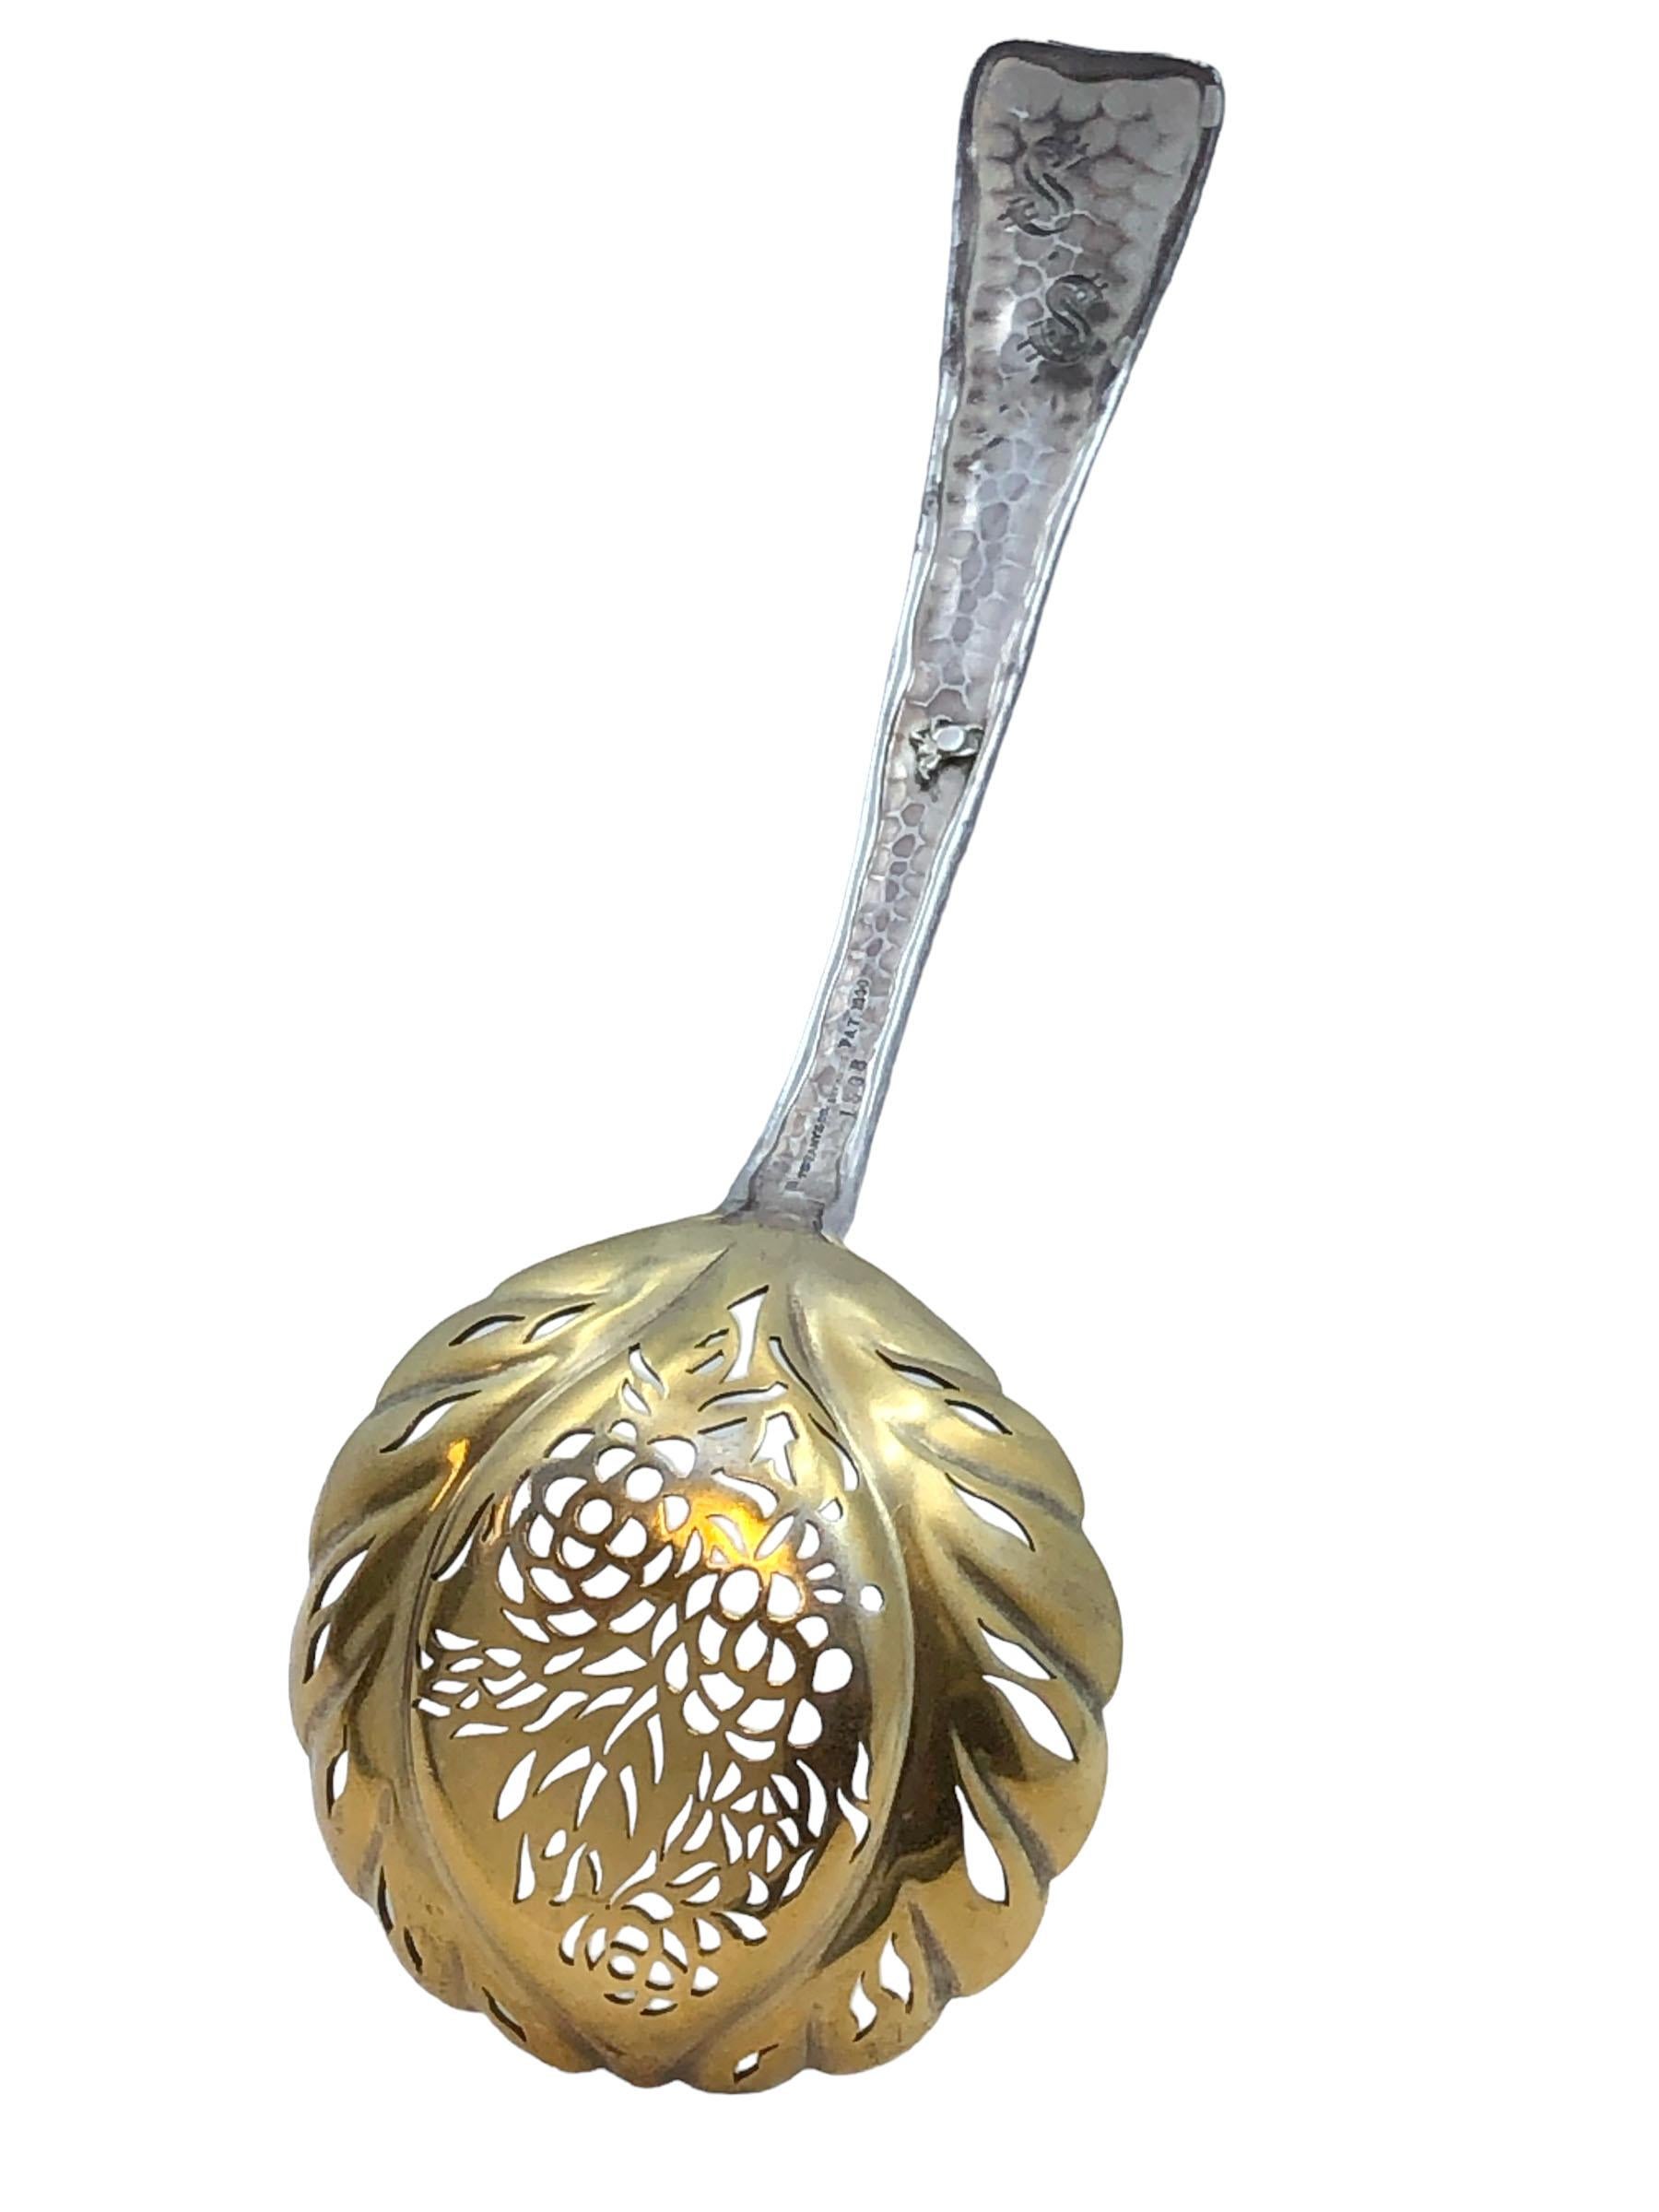 Circa 1910 Tiffany & Company Aesthetic Period Vegetable Server, mesurant 6 3/4 inches in length, a hand hammered Handle with an applied Lizard on the front and an applied spider on the back, further decorated with Gold wash designs. Le bol percé en